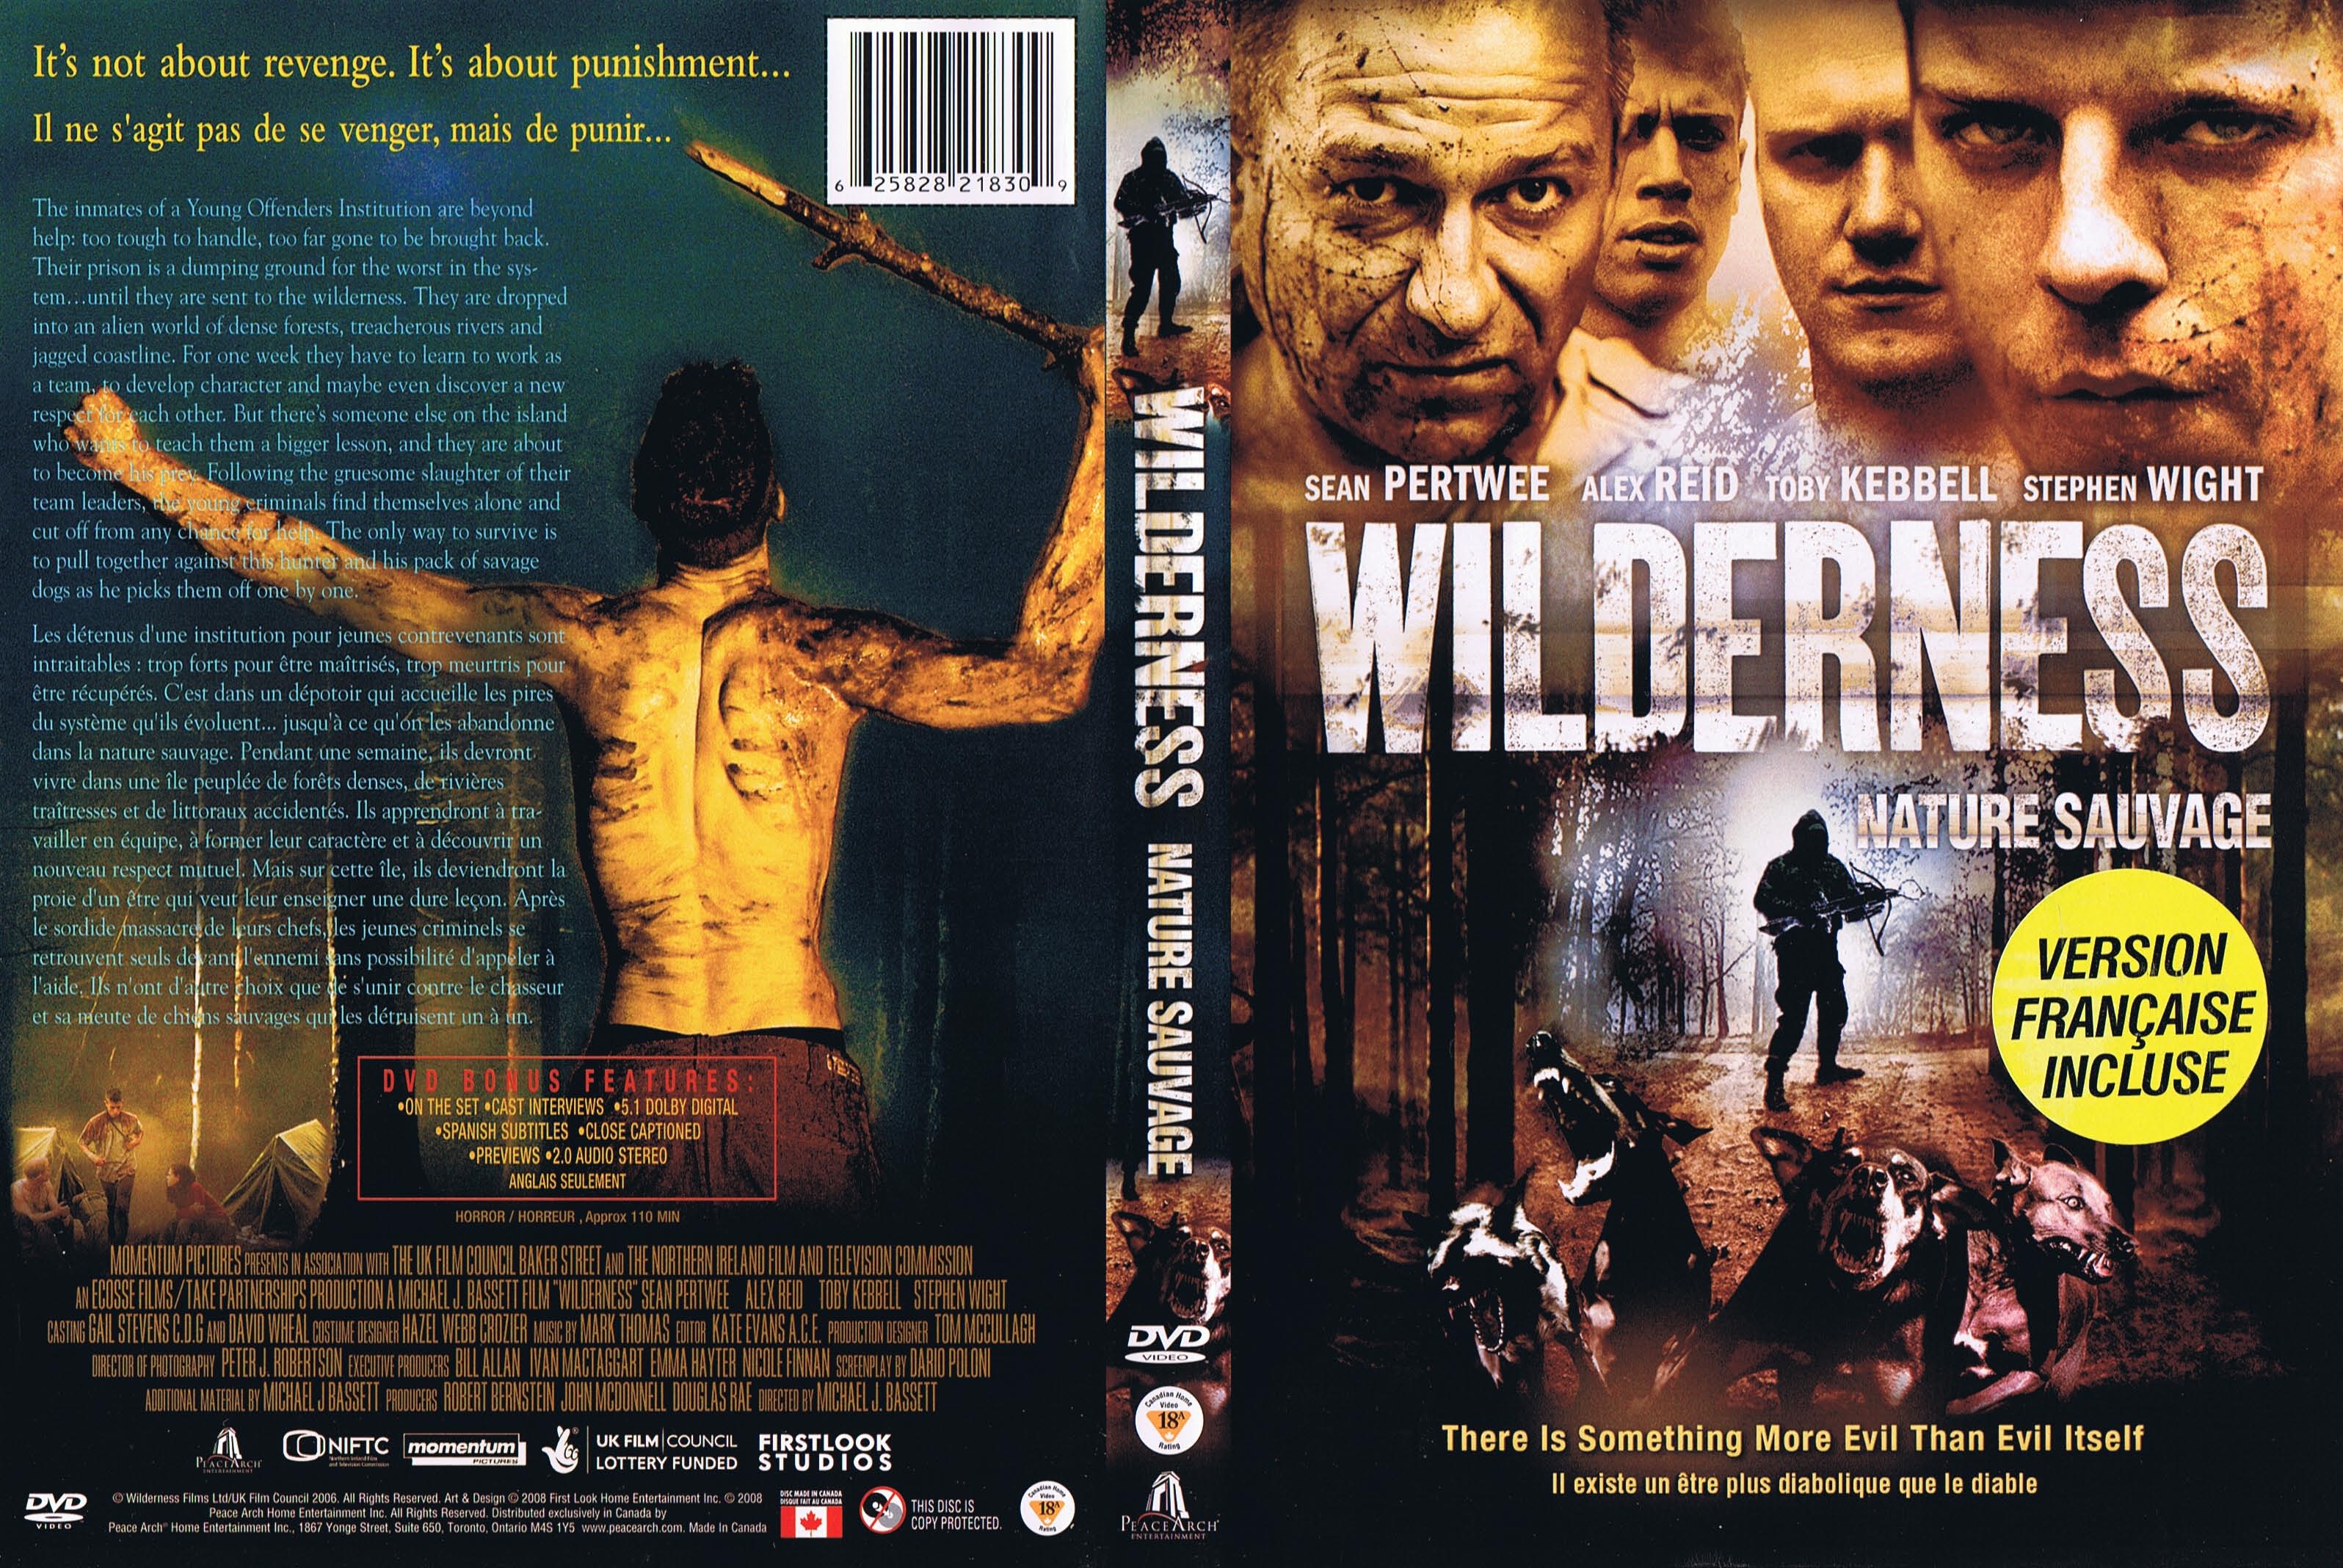 Jaquette DVD Wilderness - Nature sauvage (Canadienne)